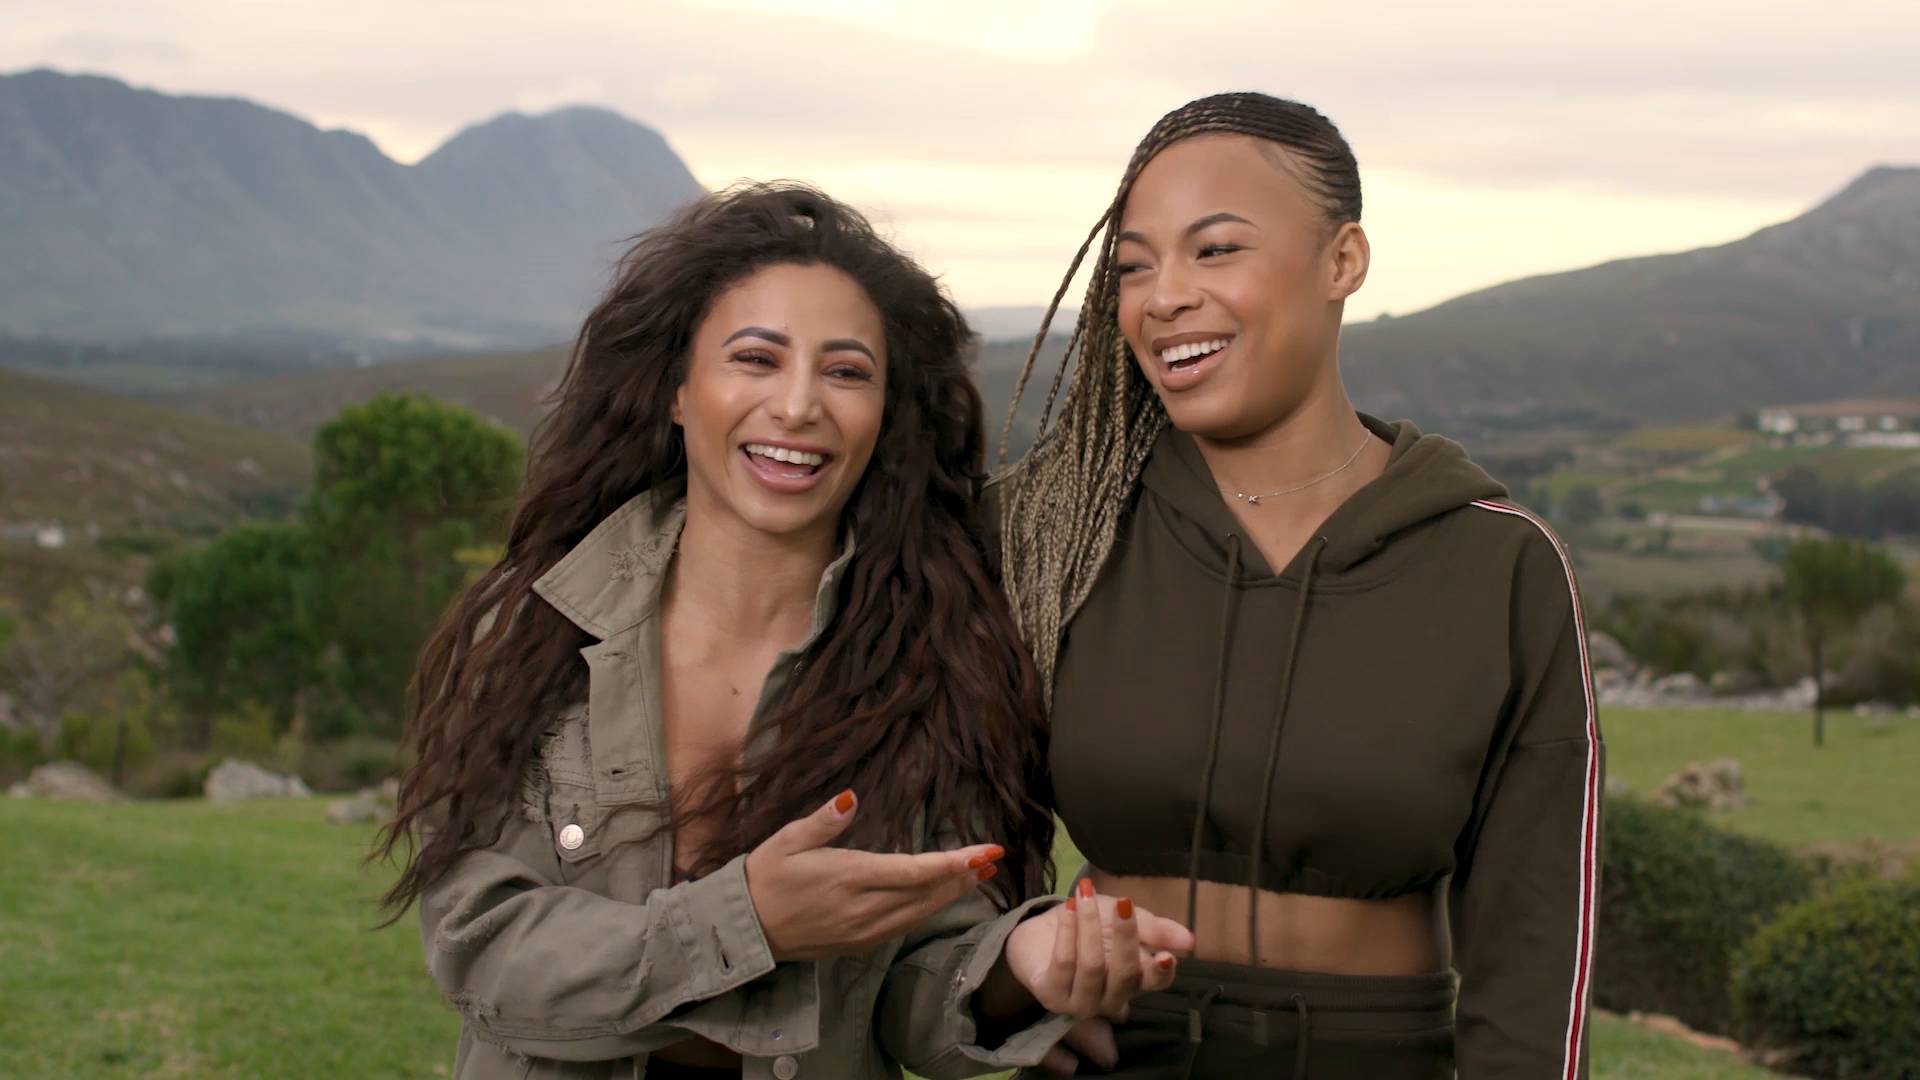 Final Reckoning Intros Kailah vs. Kam The Challenge (Video Clip)